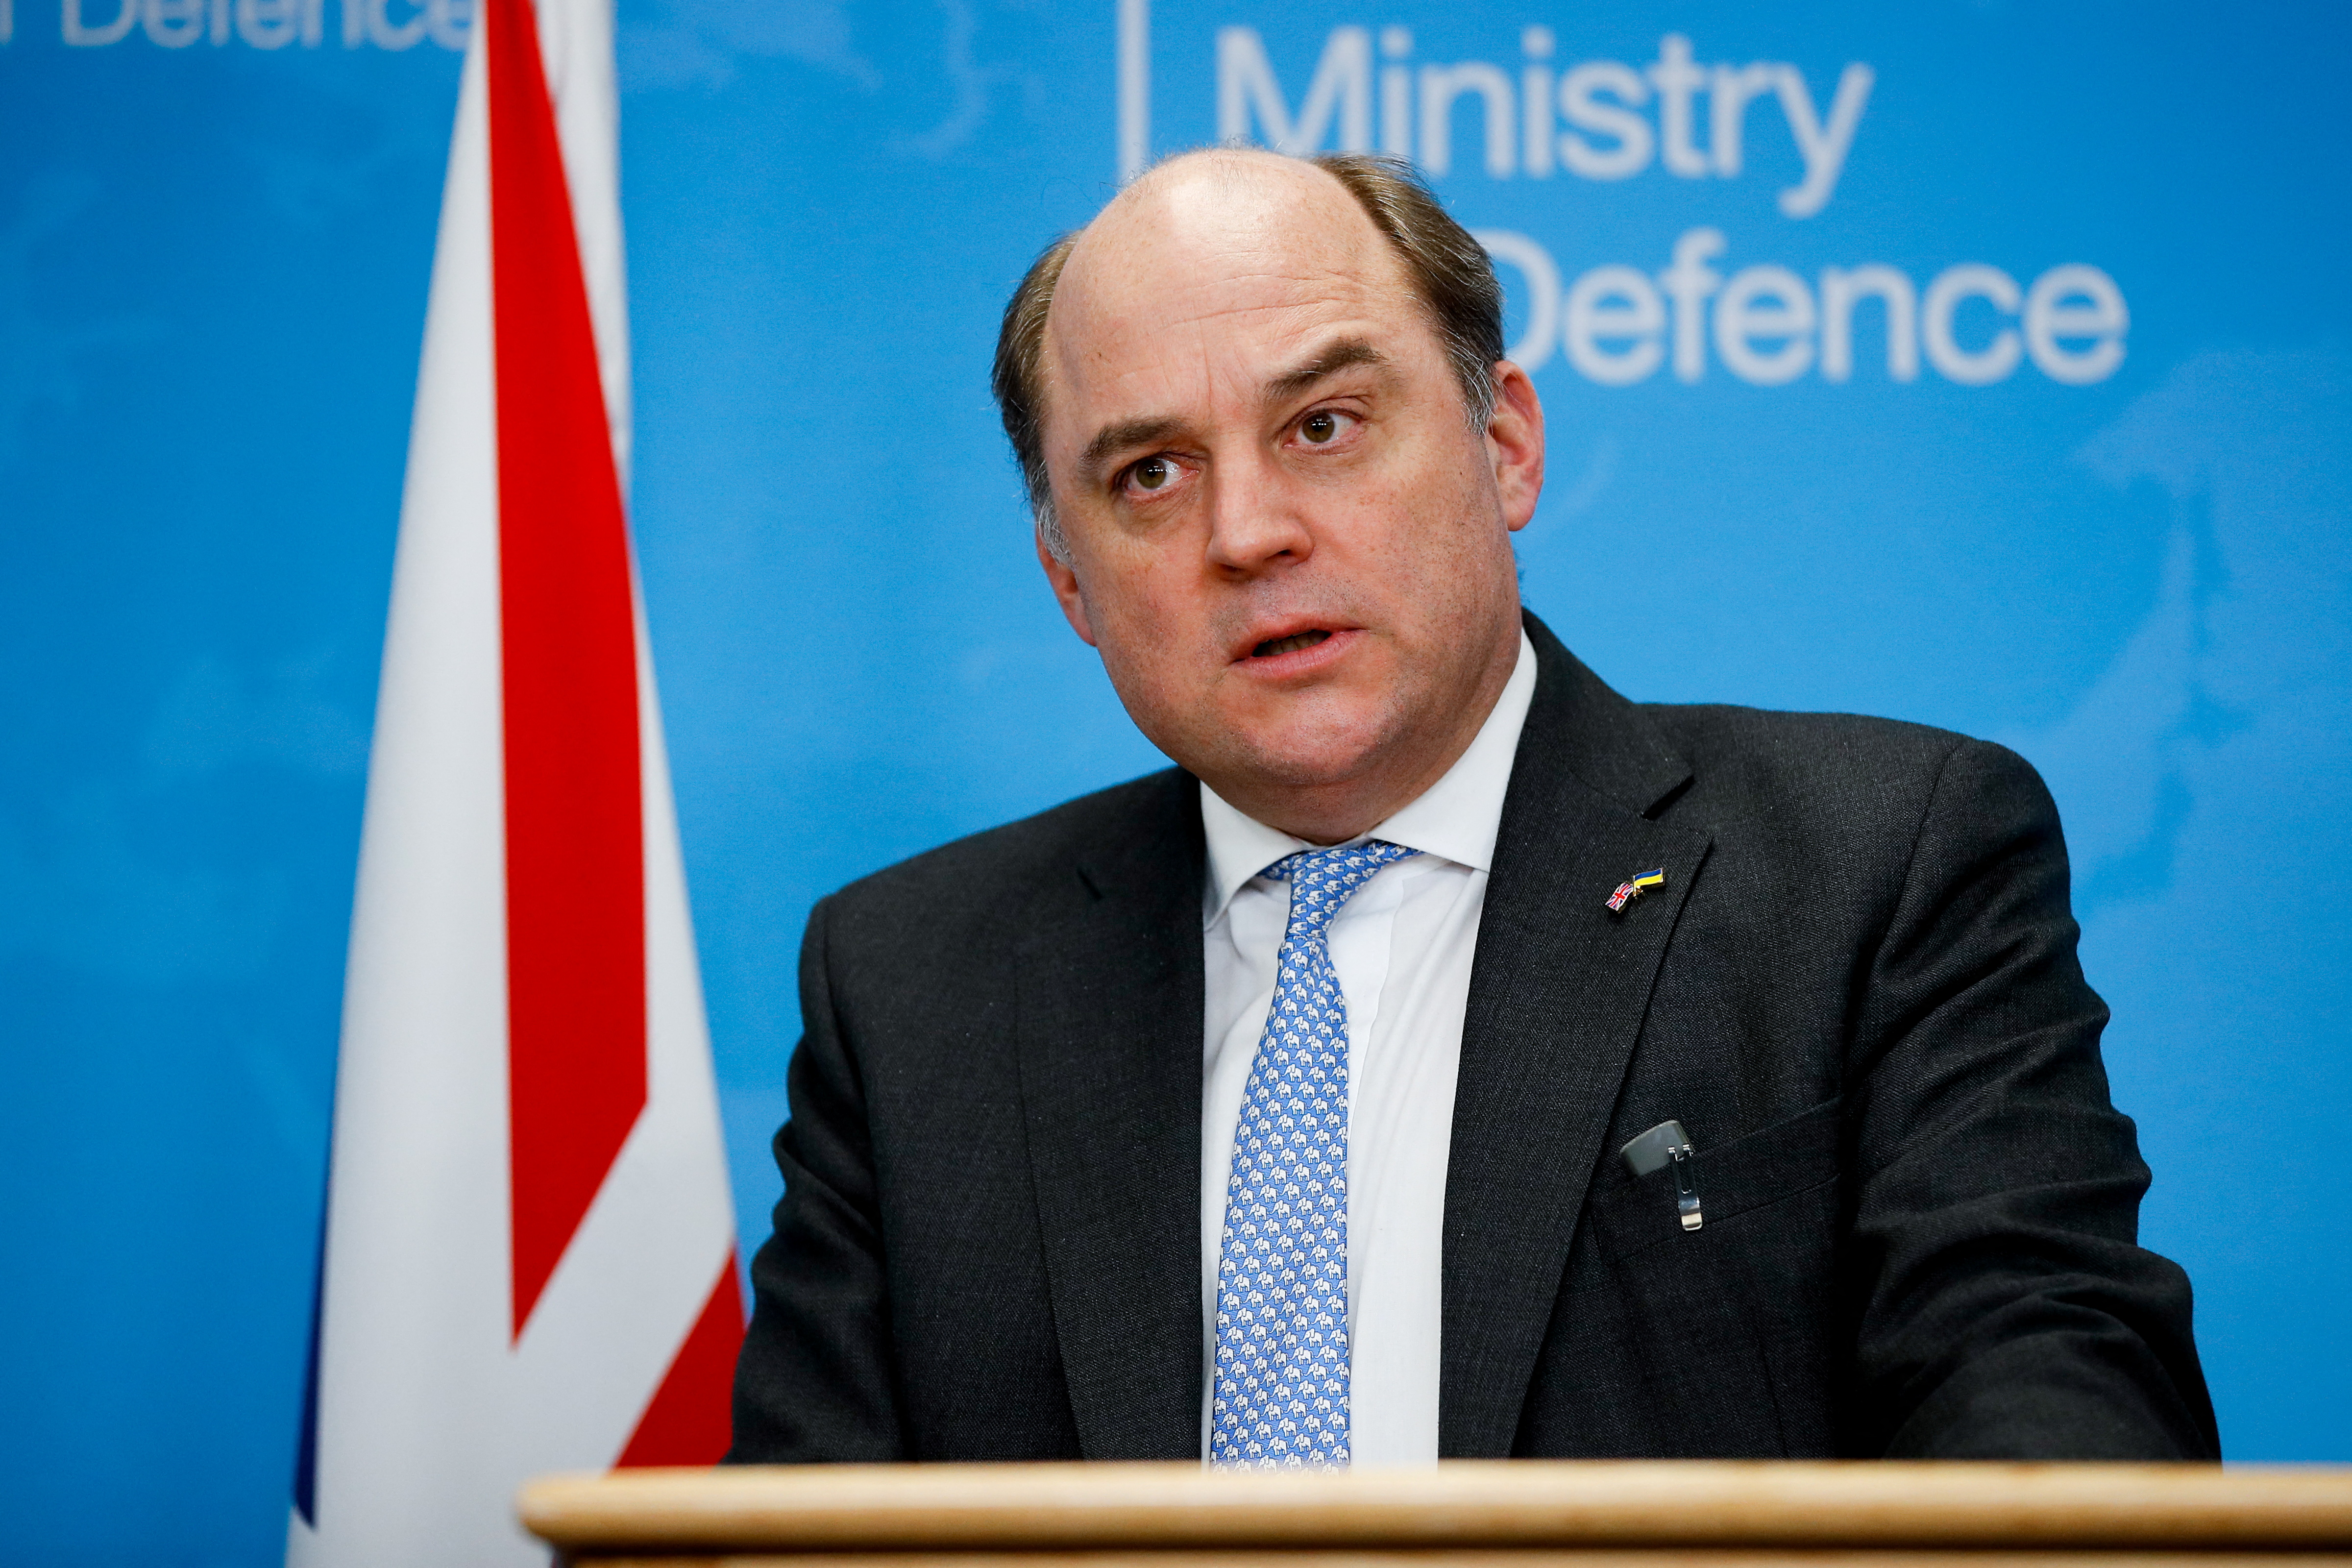 British Defence Secretary Wallace and Ukrainian Defence Minister Reznikov hold a news conference in London